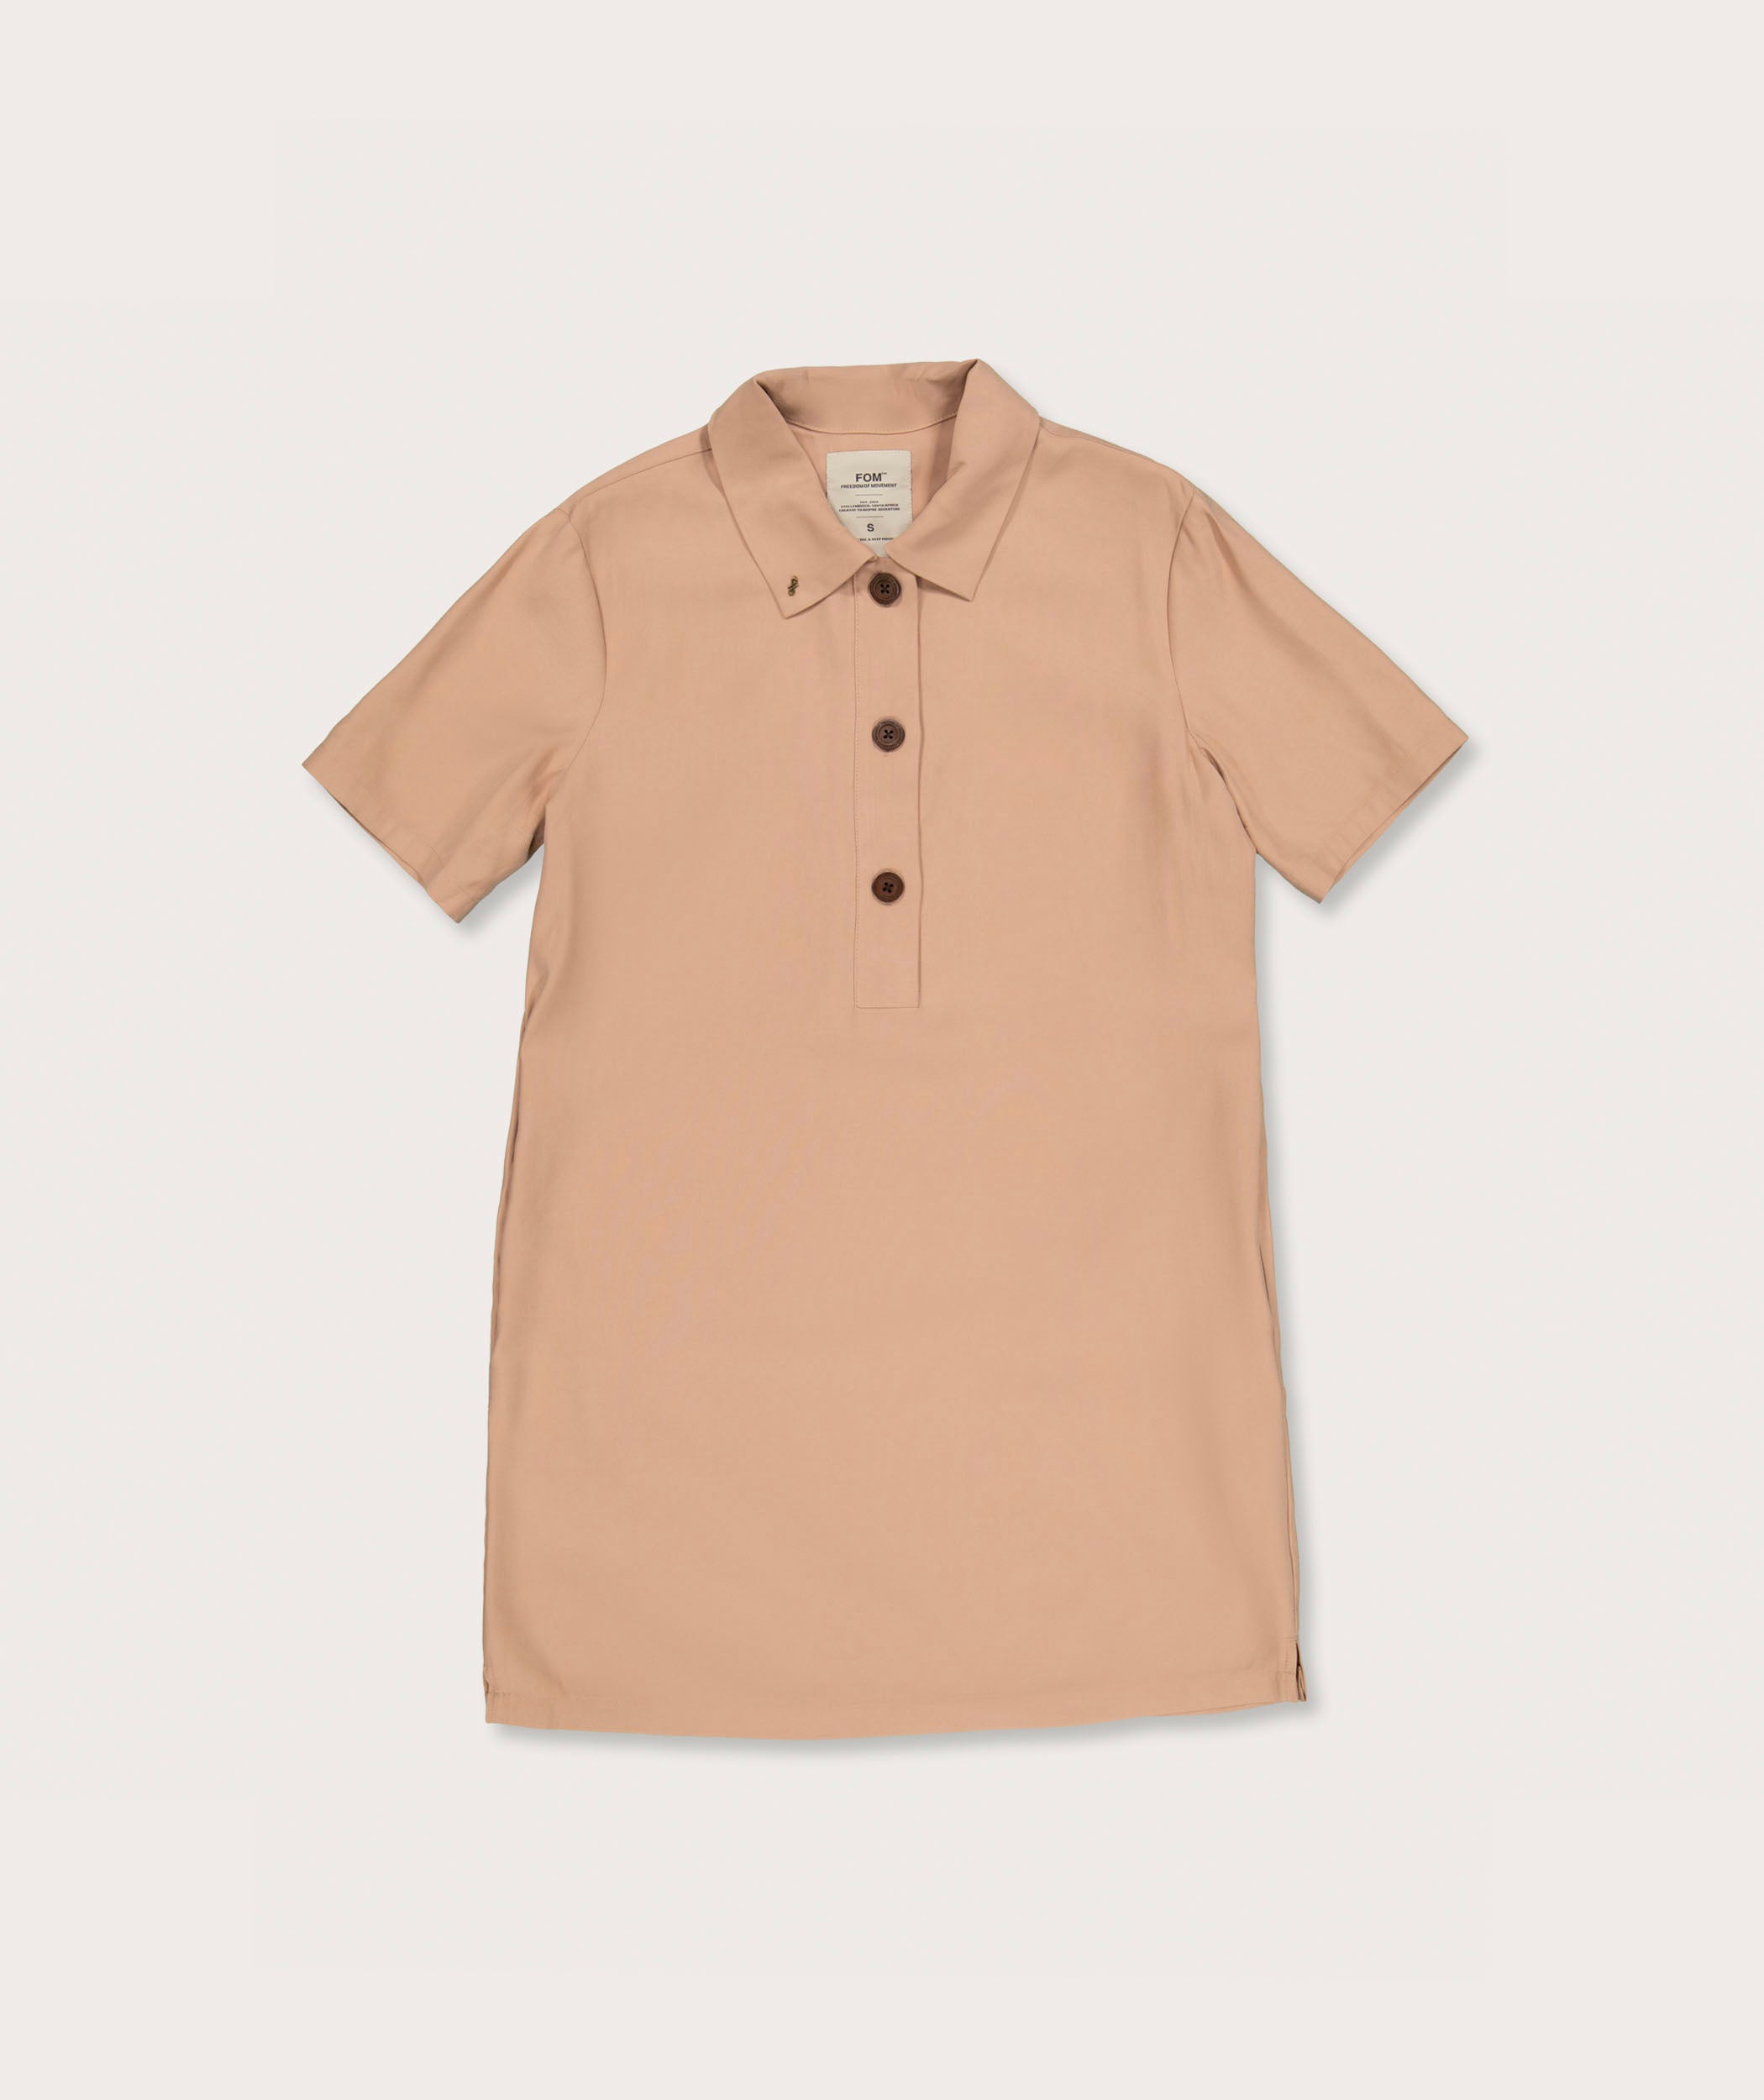 FOM Ladies Button Up Dress Short Sleeve - Dusty Pink